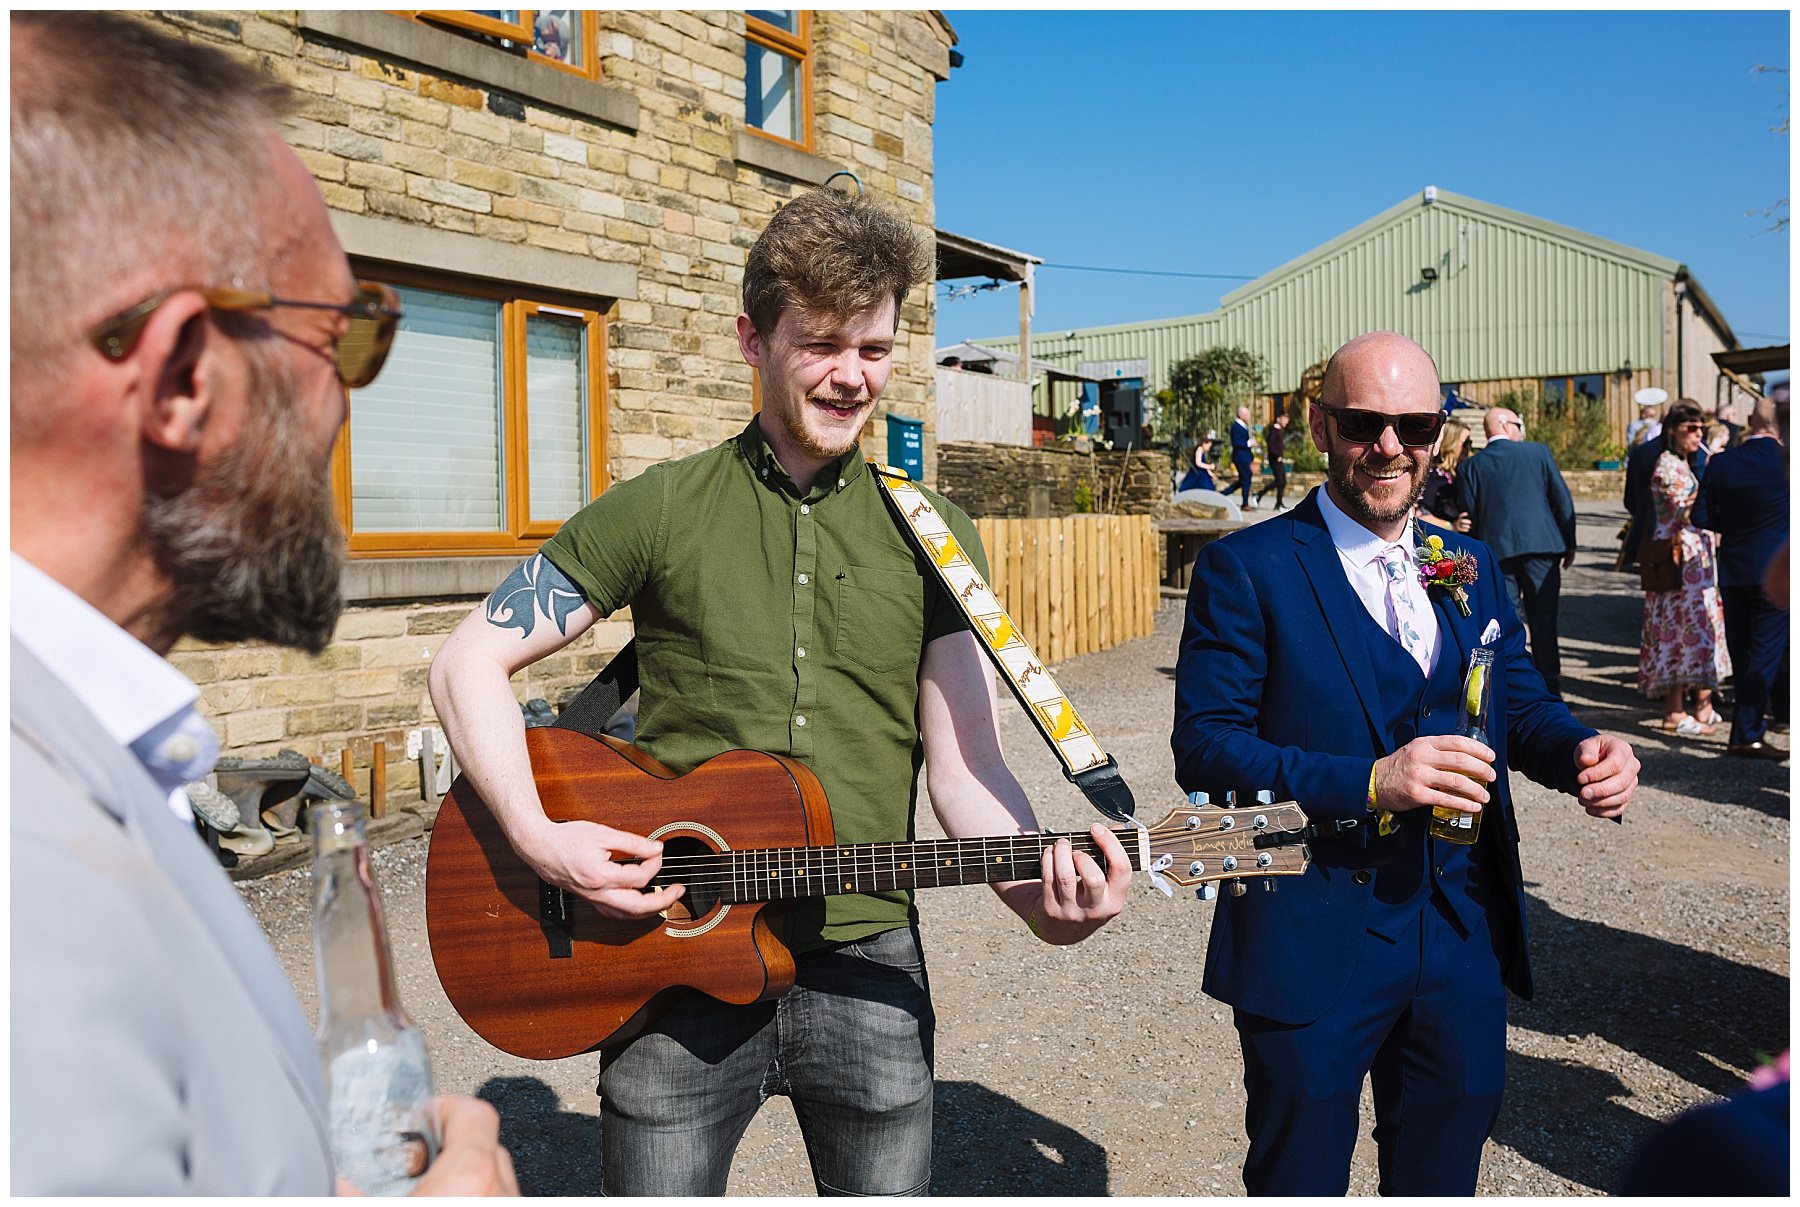 Hit The Dance Floor entertain guests during drinks reception at the wellbeing farm